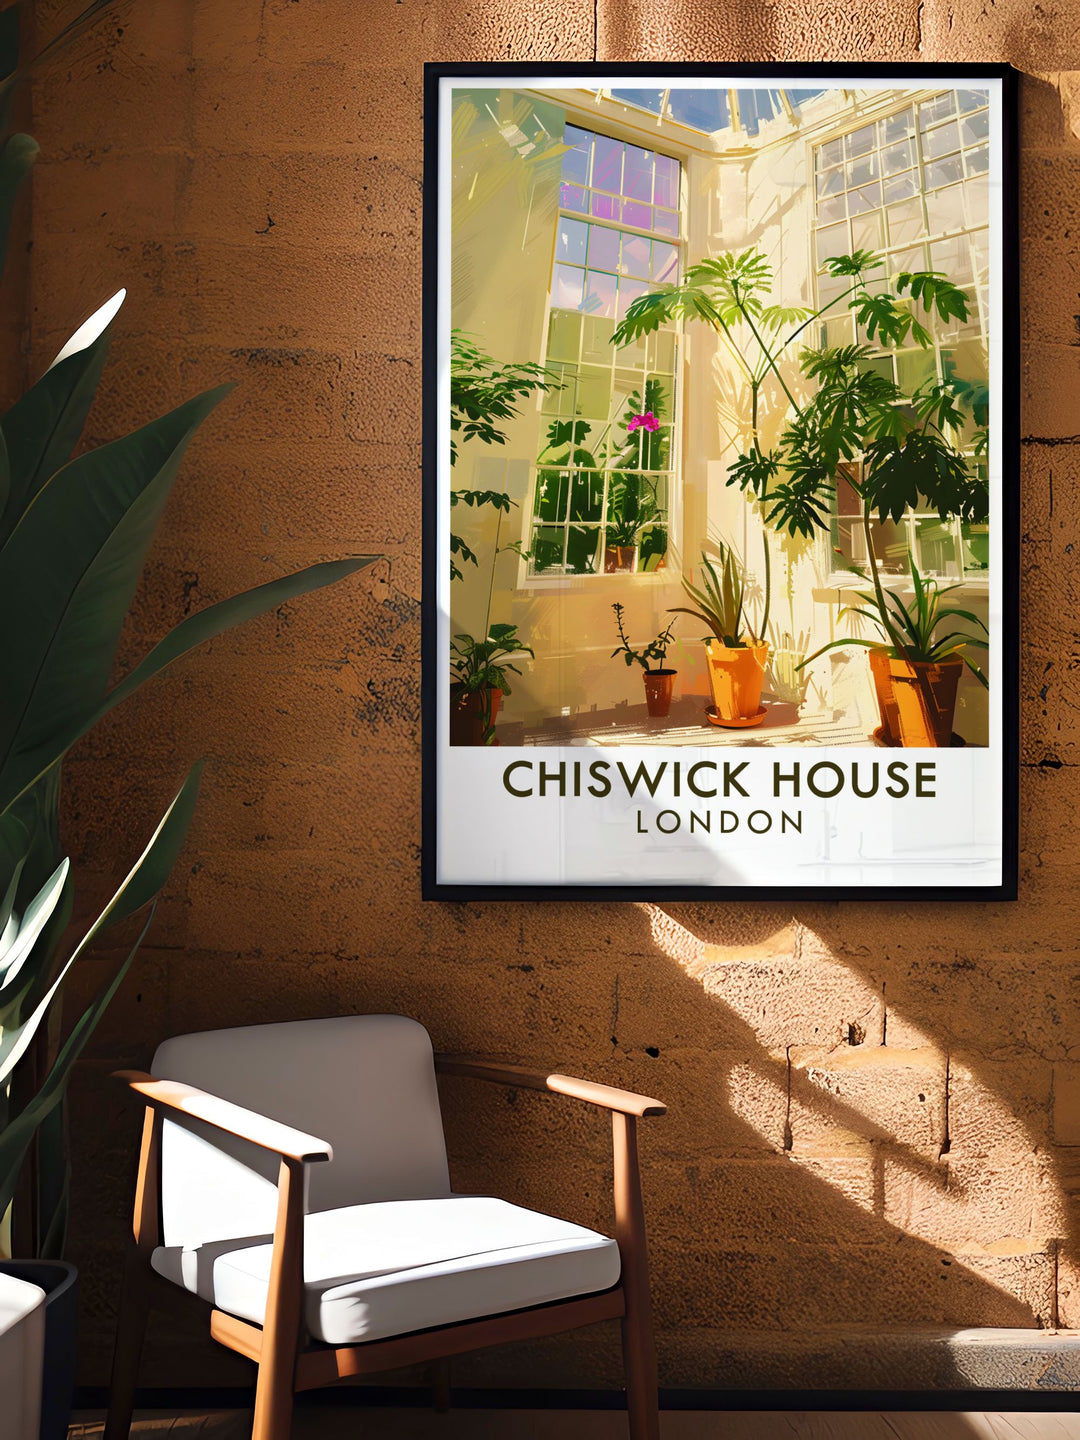 Discover the intricate details of Chiswick Houses interiors, with lavishly decorated rooms and classical sculptures reflecting the opulence of the Georgian era.